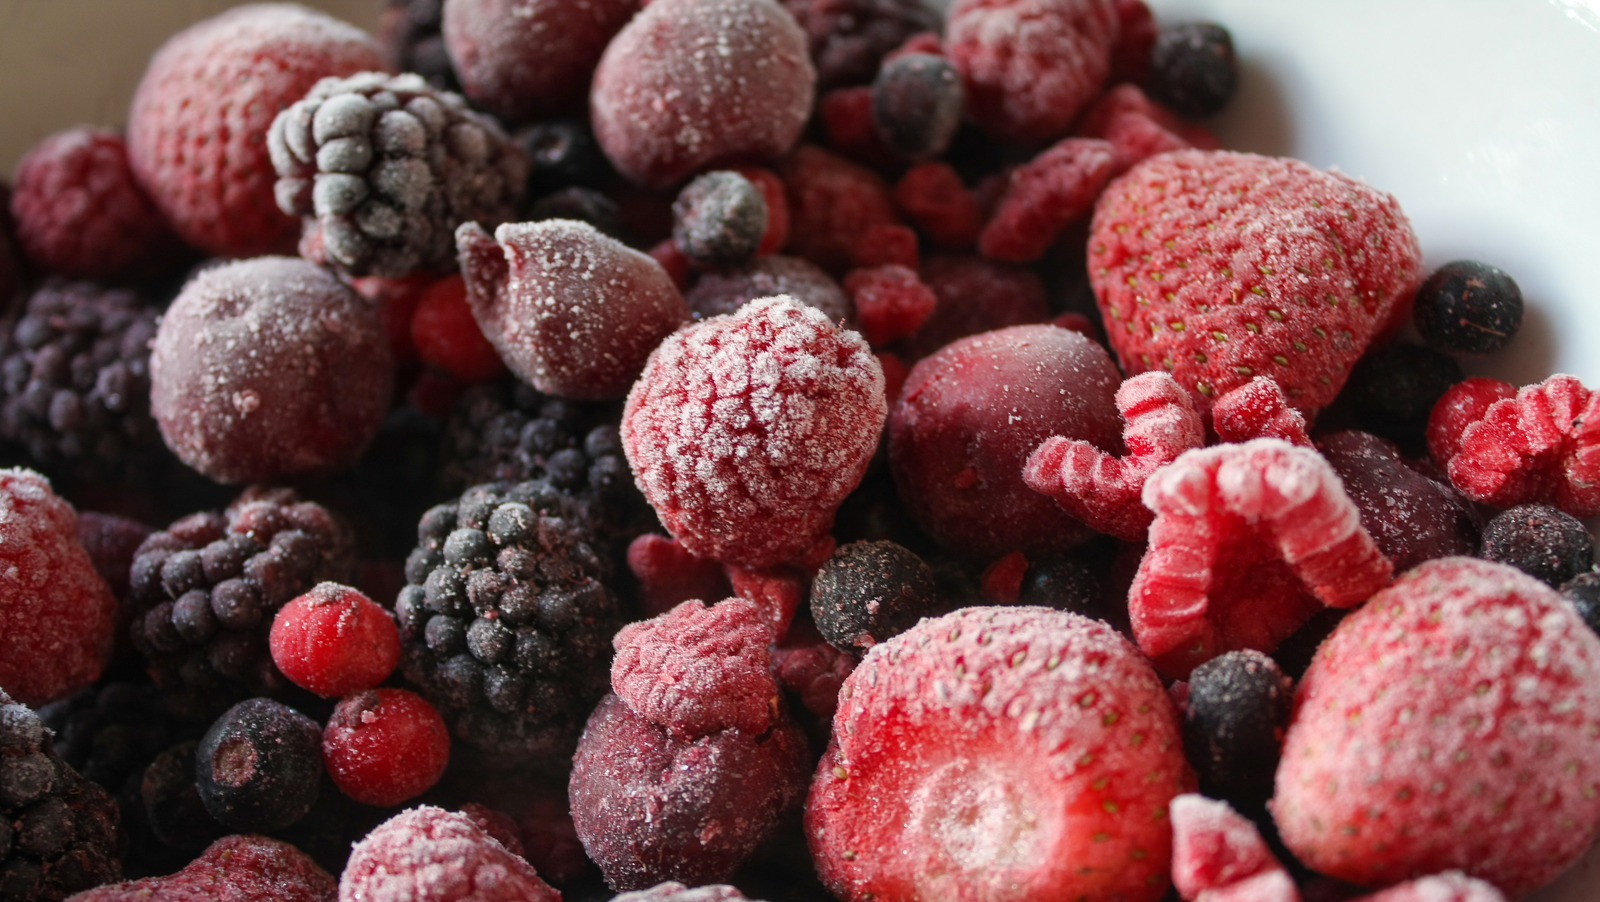 Aldi And Trader Joe's Are Part Of A Massive Frozen Fruit Recall For